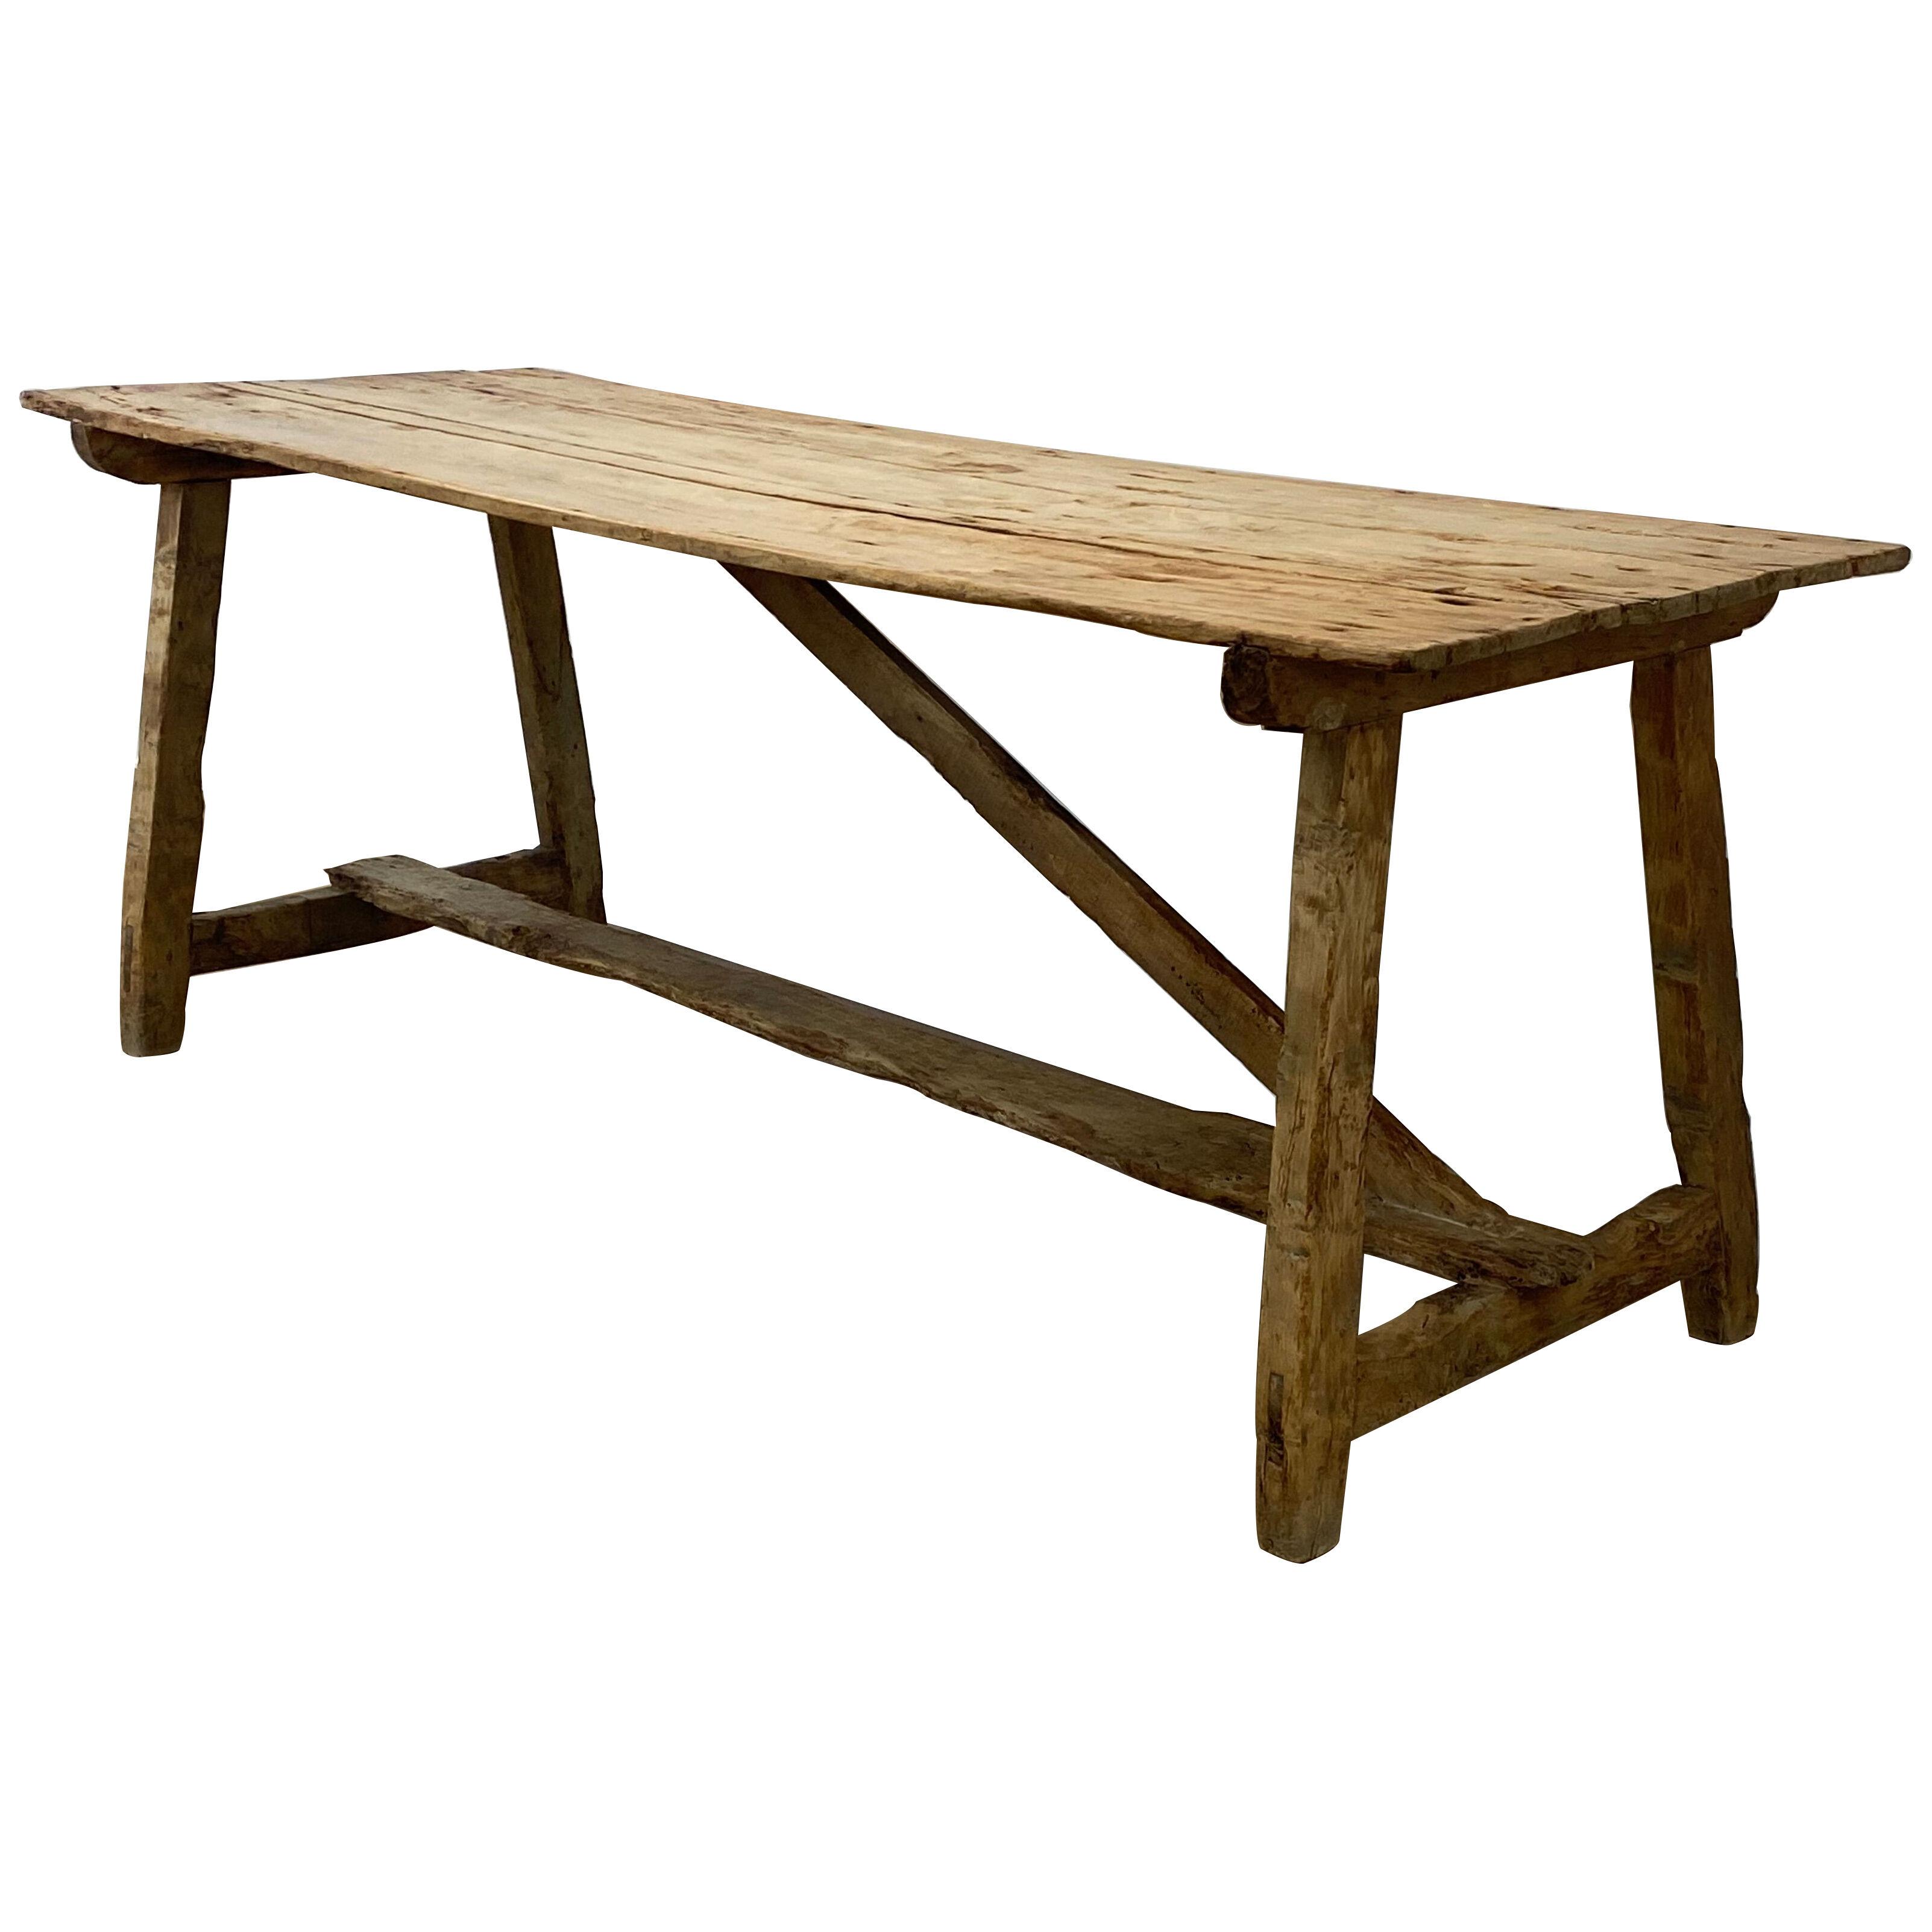 Rustic, Brutalist Spanish Country Table